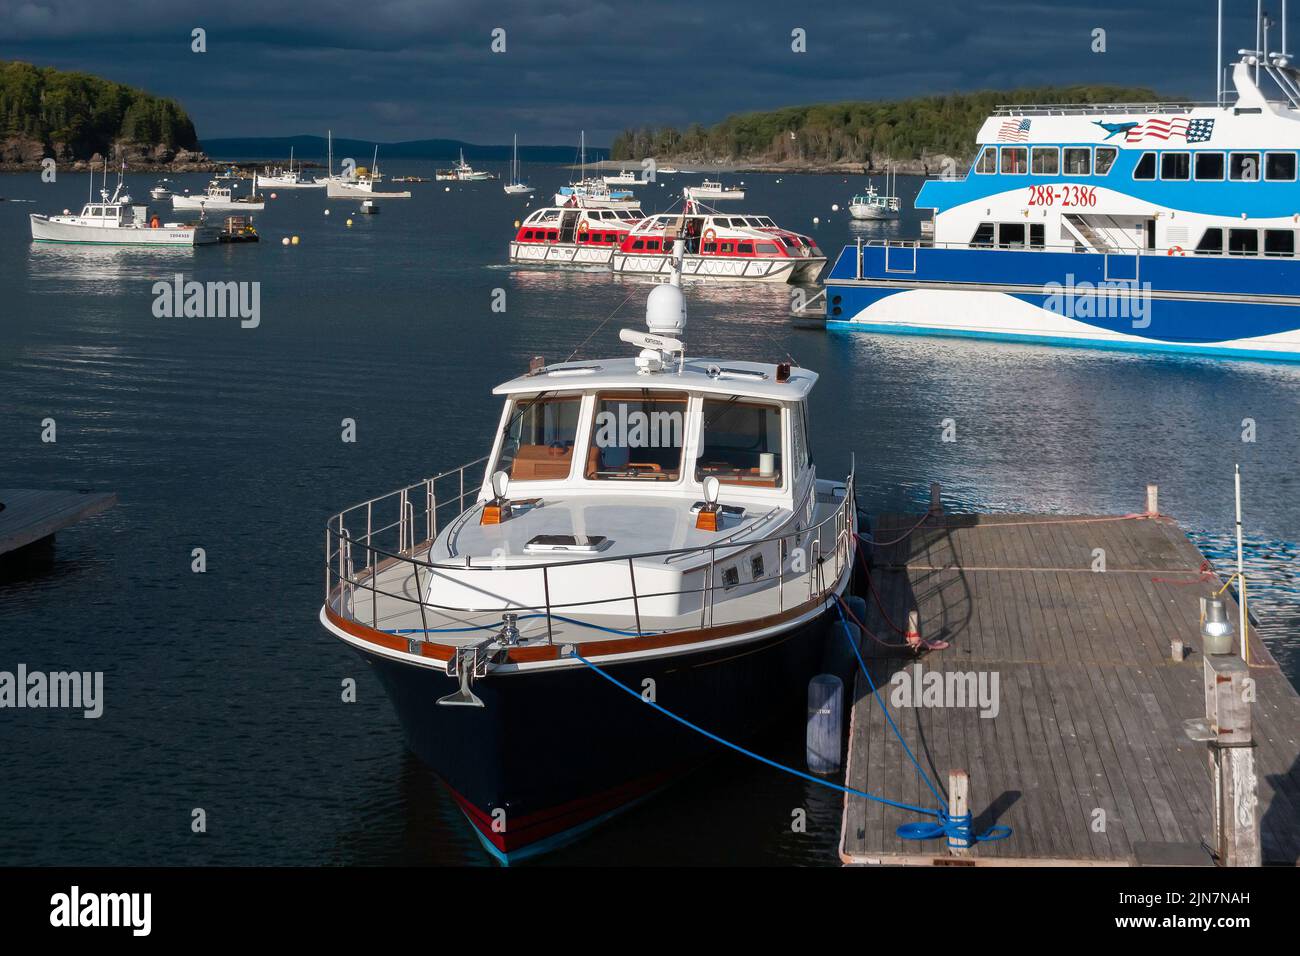 A large pleasure boat tied up to a dock in Frenchman bay of Bar Harbor, Maine, USA with many boats at anchor. Stock Photo